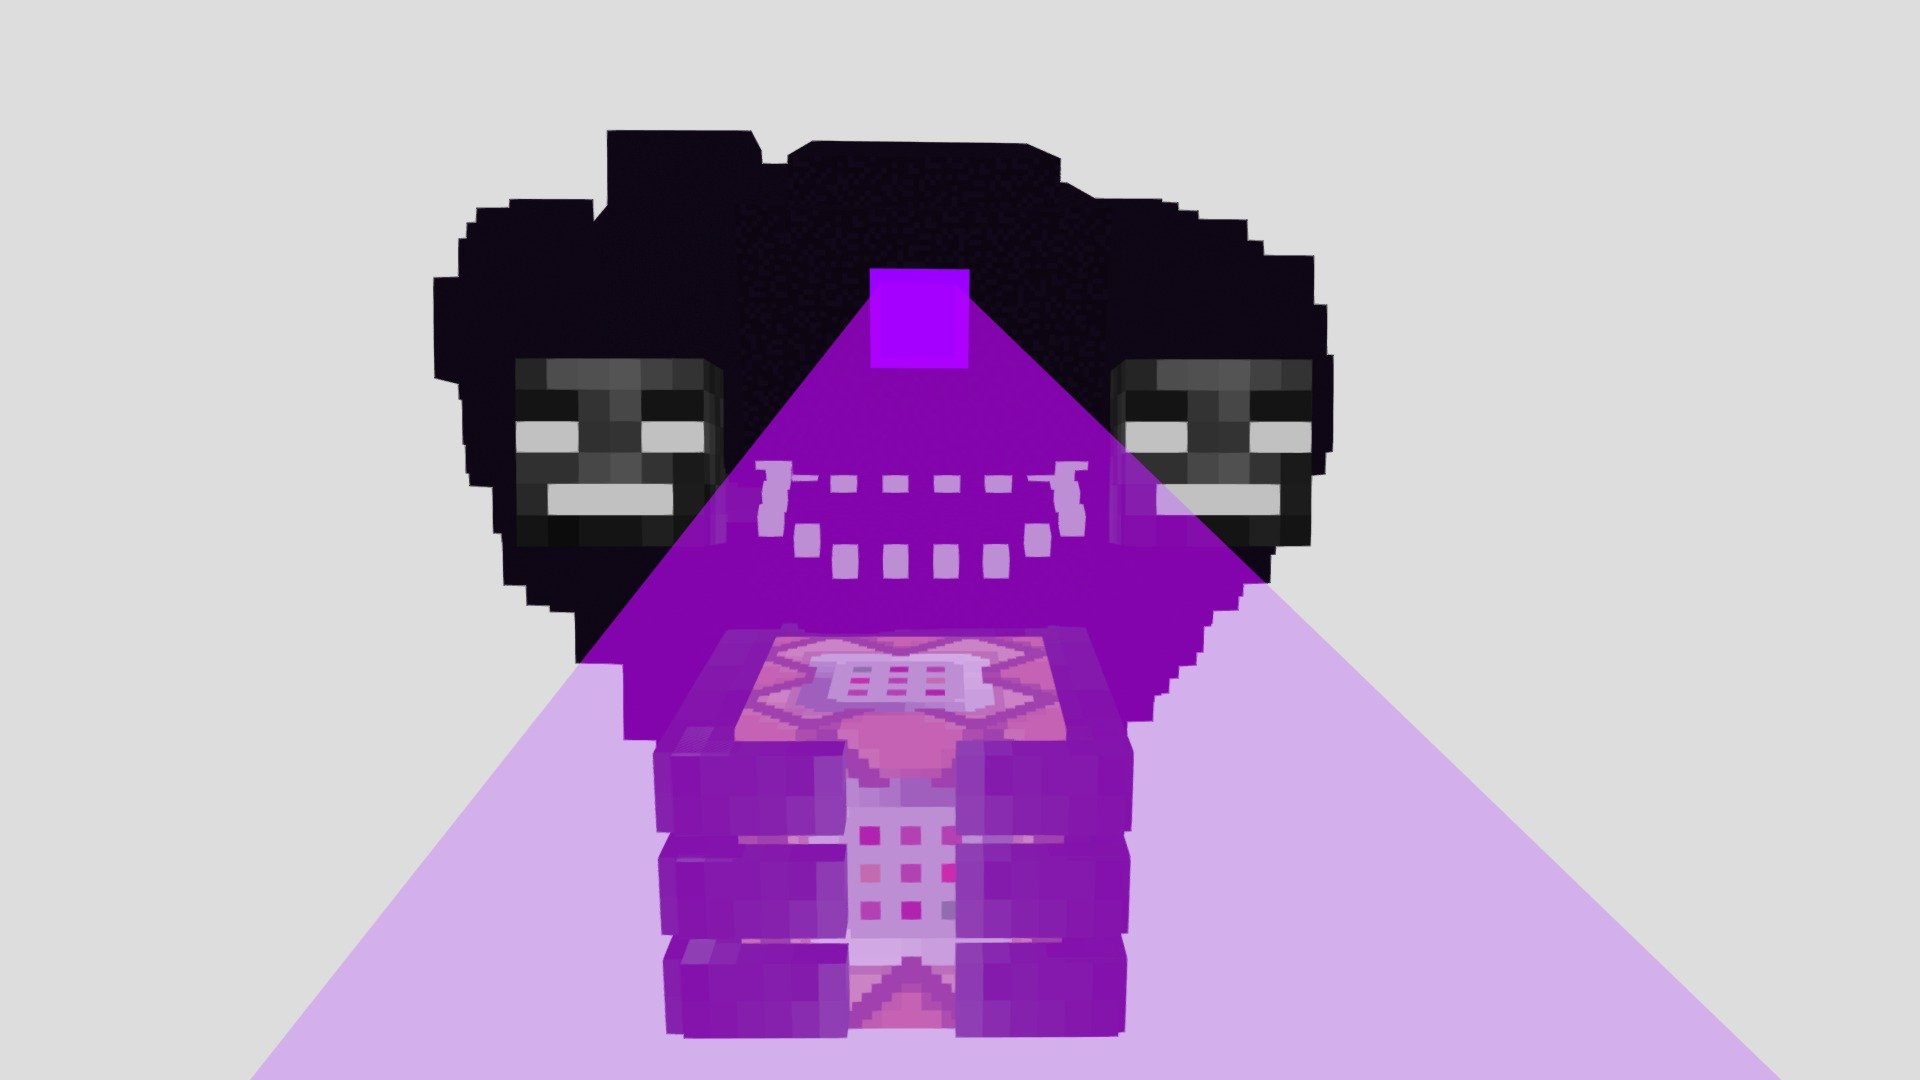 Wither Storm Ultimate Evolution 2 {Minecraft Animation} 